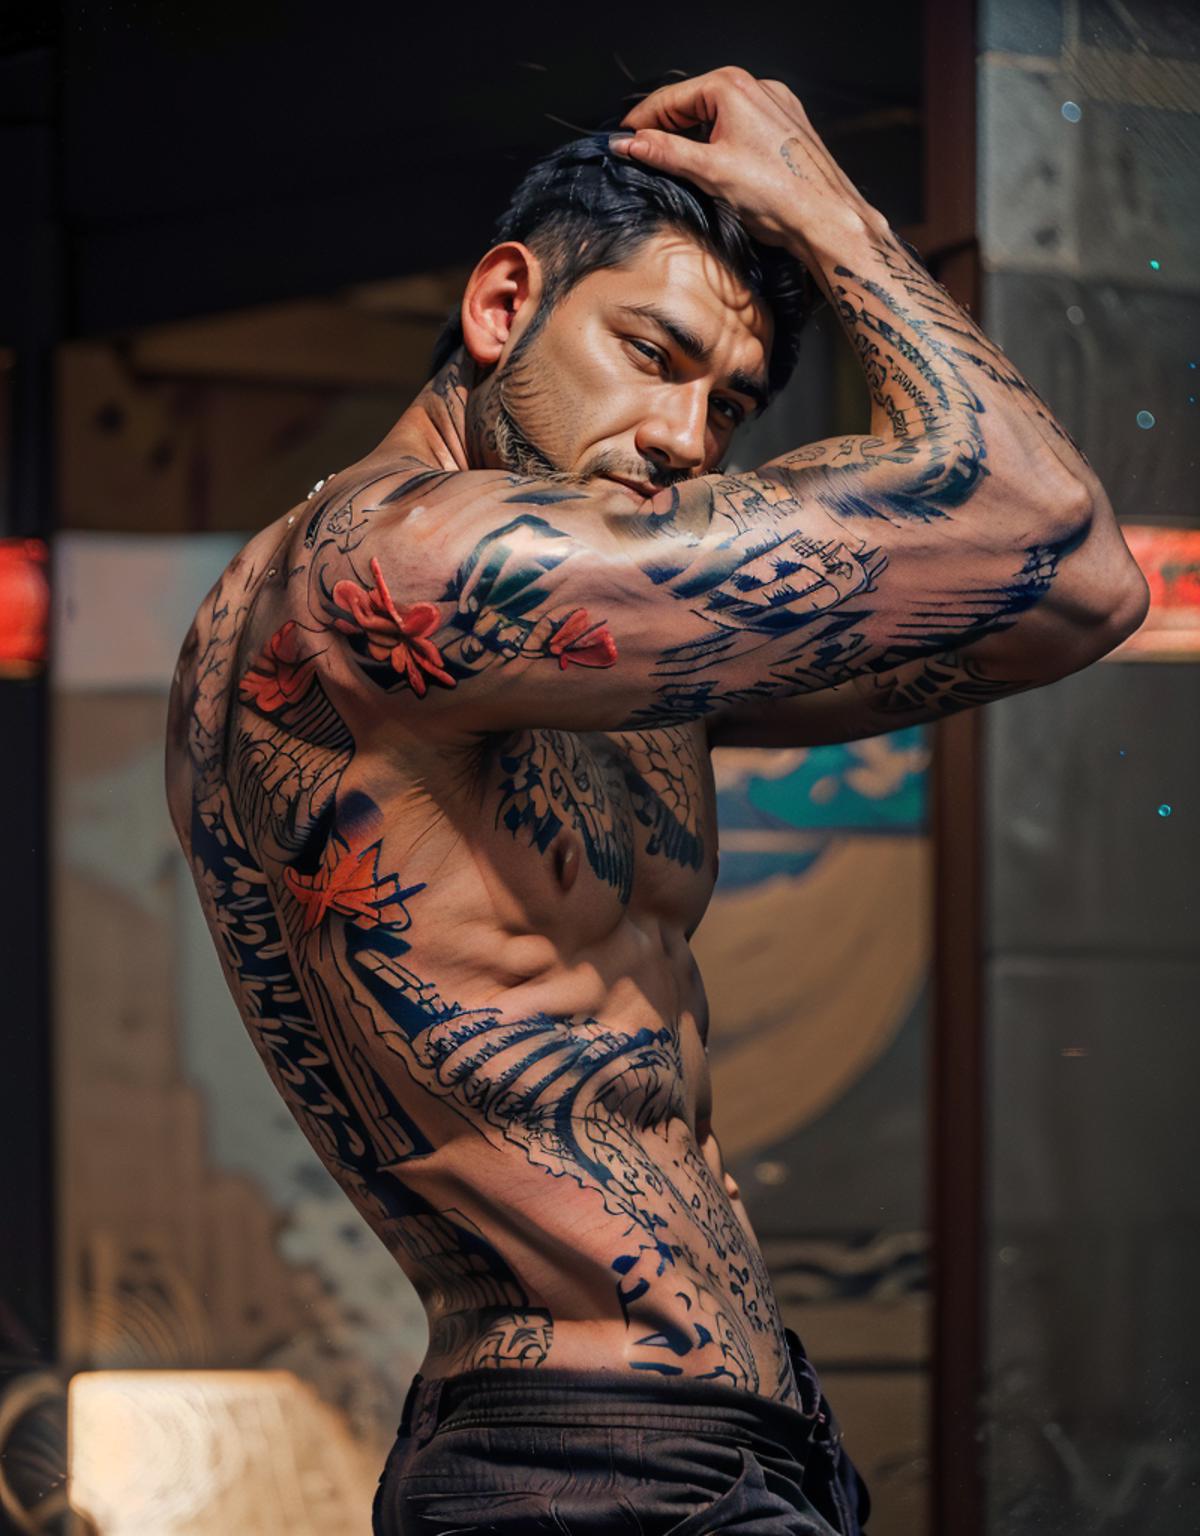 Yakuza Japan Tattoo STYLE (Concept) by YeiyeiArt - v1.0 | Stable ...